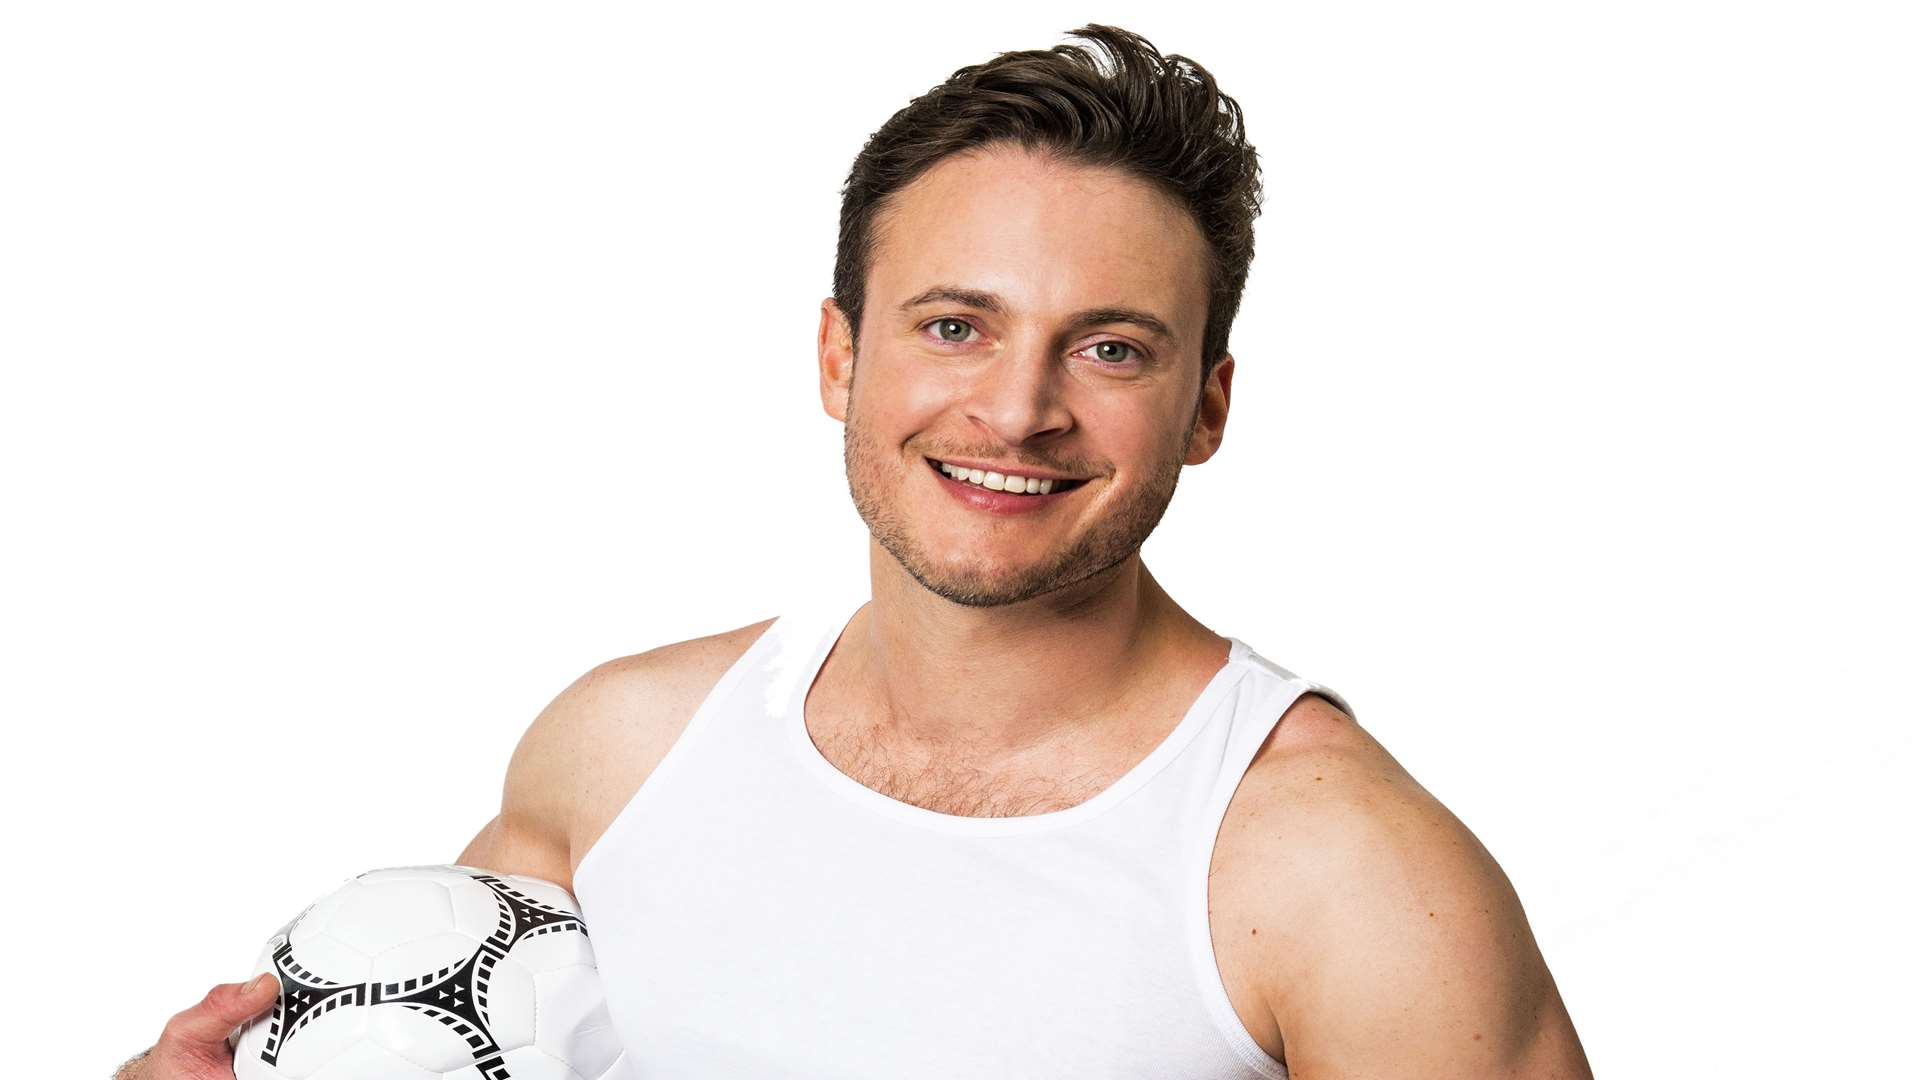 Gary Lucy stars in The Full Monty